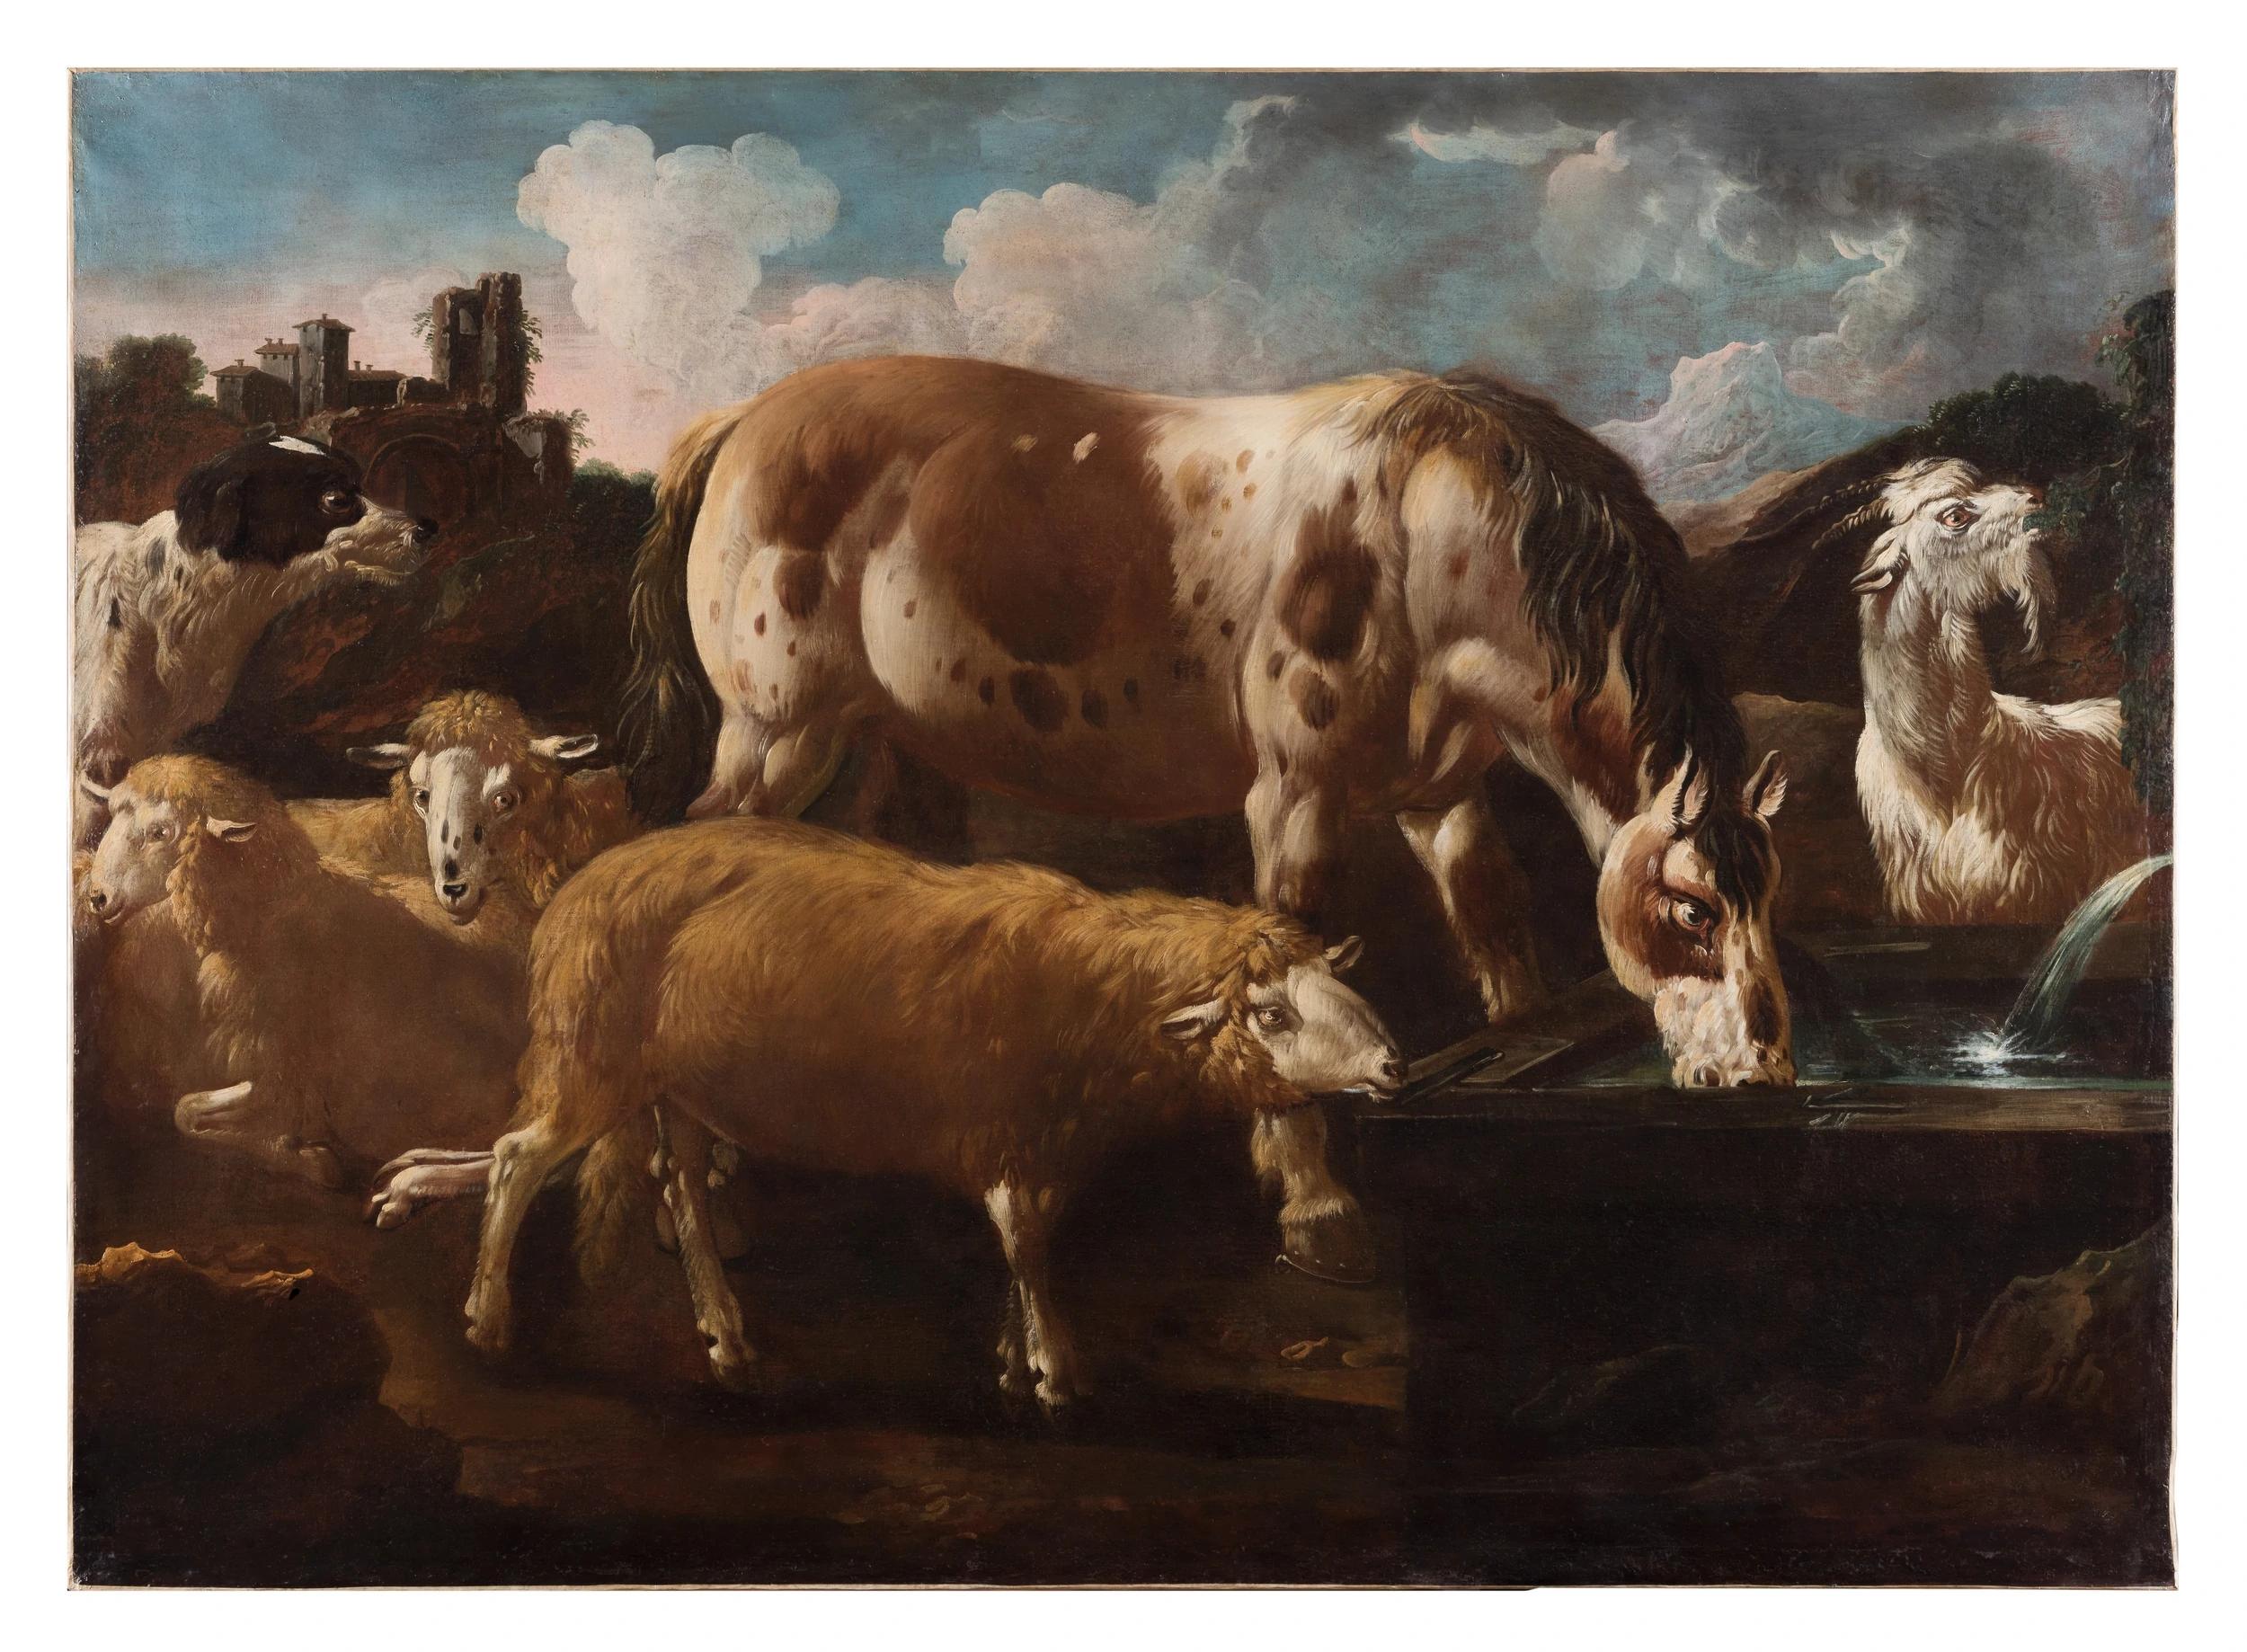 Large oil on canvas depicting farm animals (sheeps, goat, horse, dog) at the watering trough, against a backdrop of a Roman countryside landscape.

Philipp Peter Roos was a German painter and etching artist, later nicknamed Rosa di Tivoli, born in